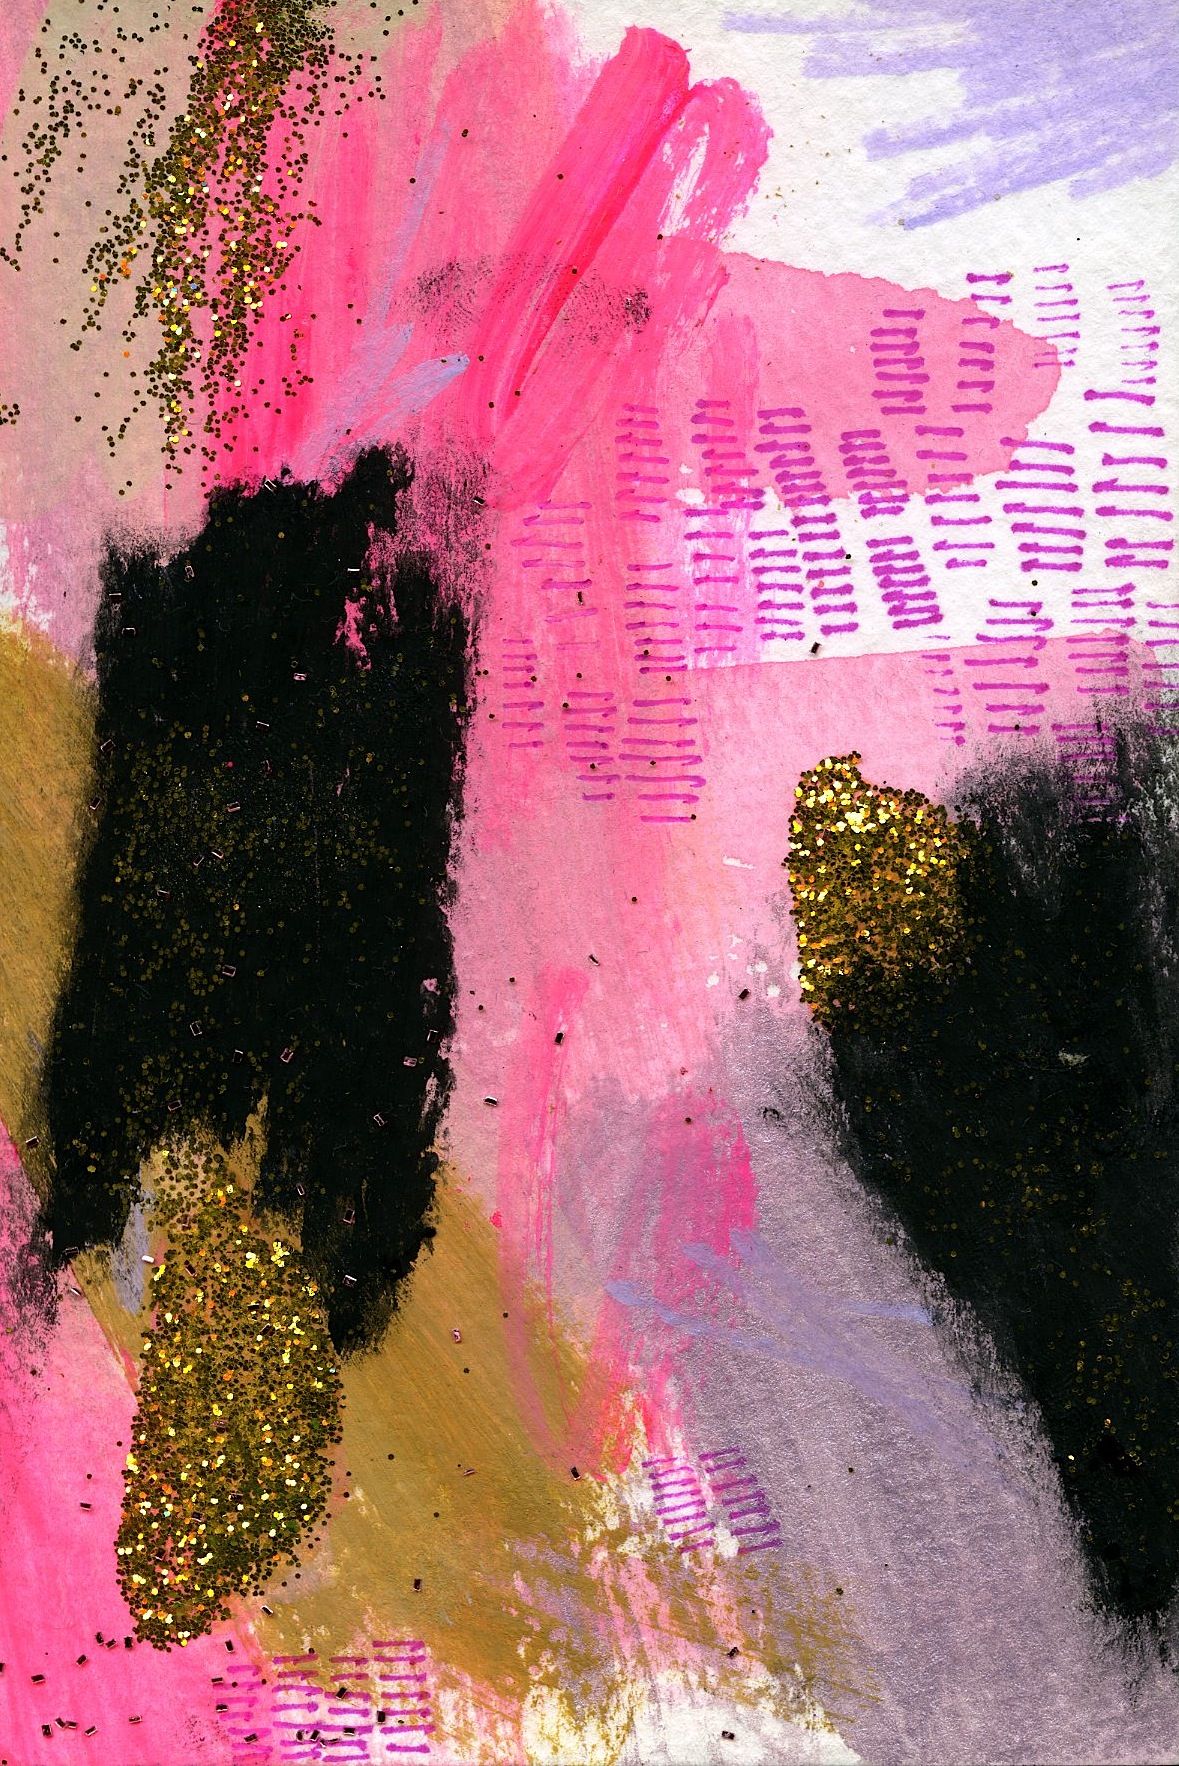 ruin everything november 2014 watercolor, gouache. ink, oil pastel, and glitter on paper, 6” x 4”. Abstract, Art, Prints